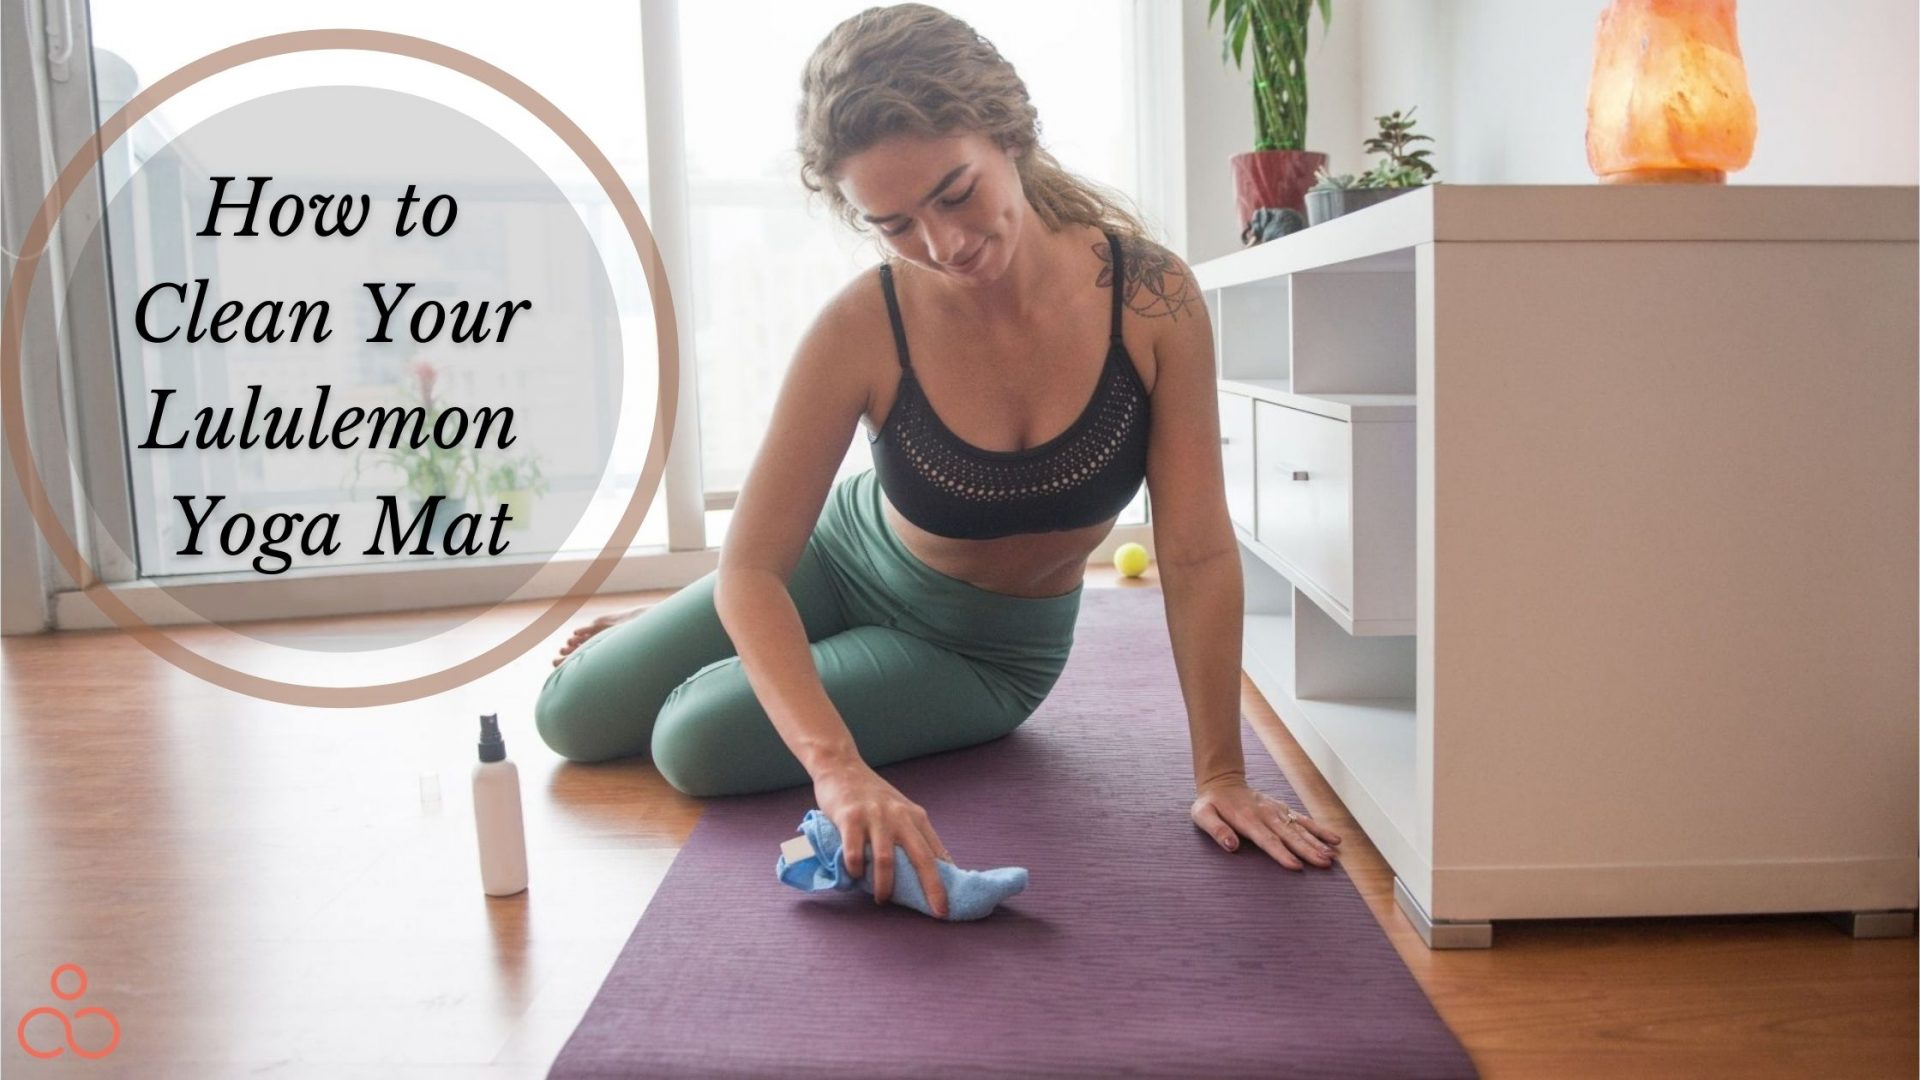 How To Clean Lululemon Yoga Mat At Home? 